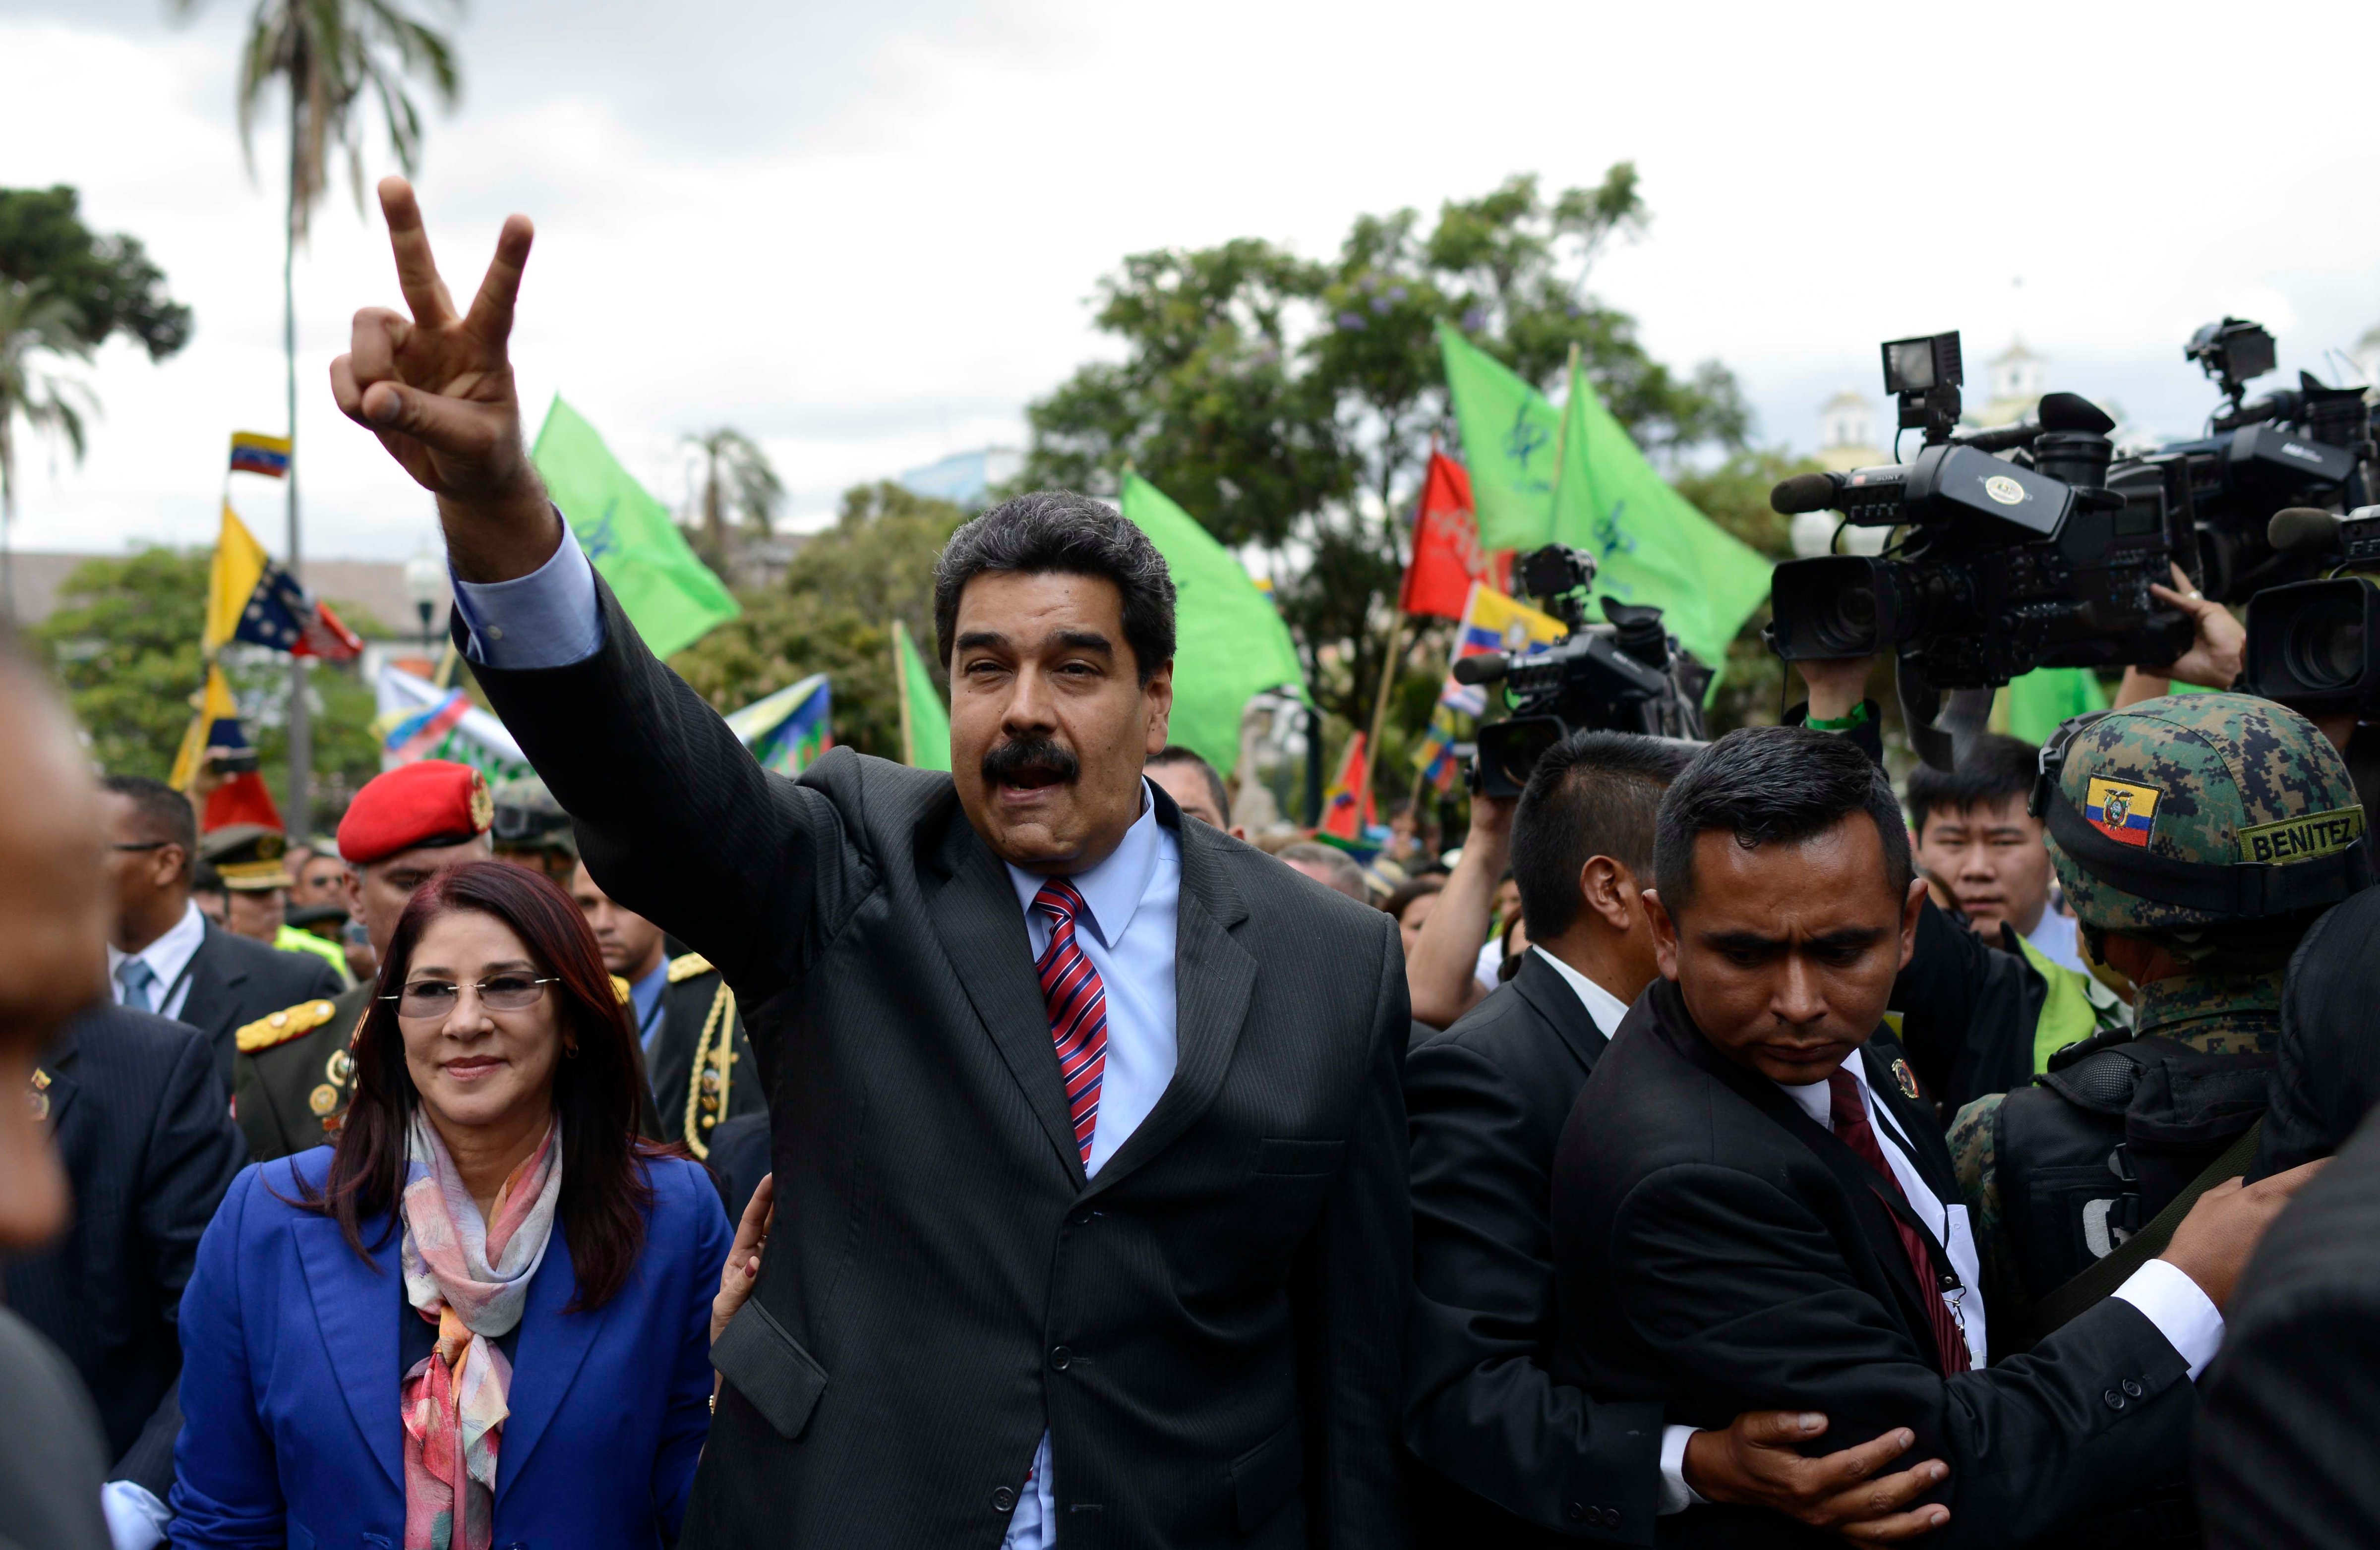 Venezuela's President Nicolas Maduro, accompanied by his first lady Cilia Flores, flashes a peace sign as he arrives at government palace, in Quito, Ecuador, Sept. 21, 2015. (Patricio Realpe—AP)